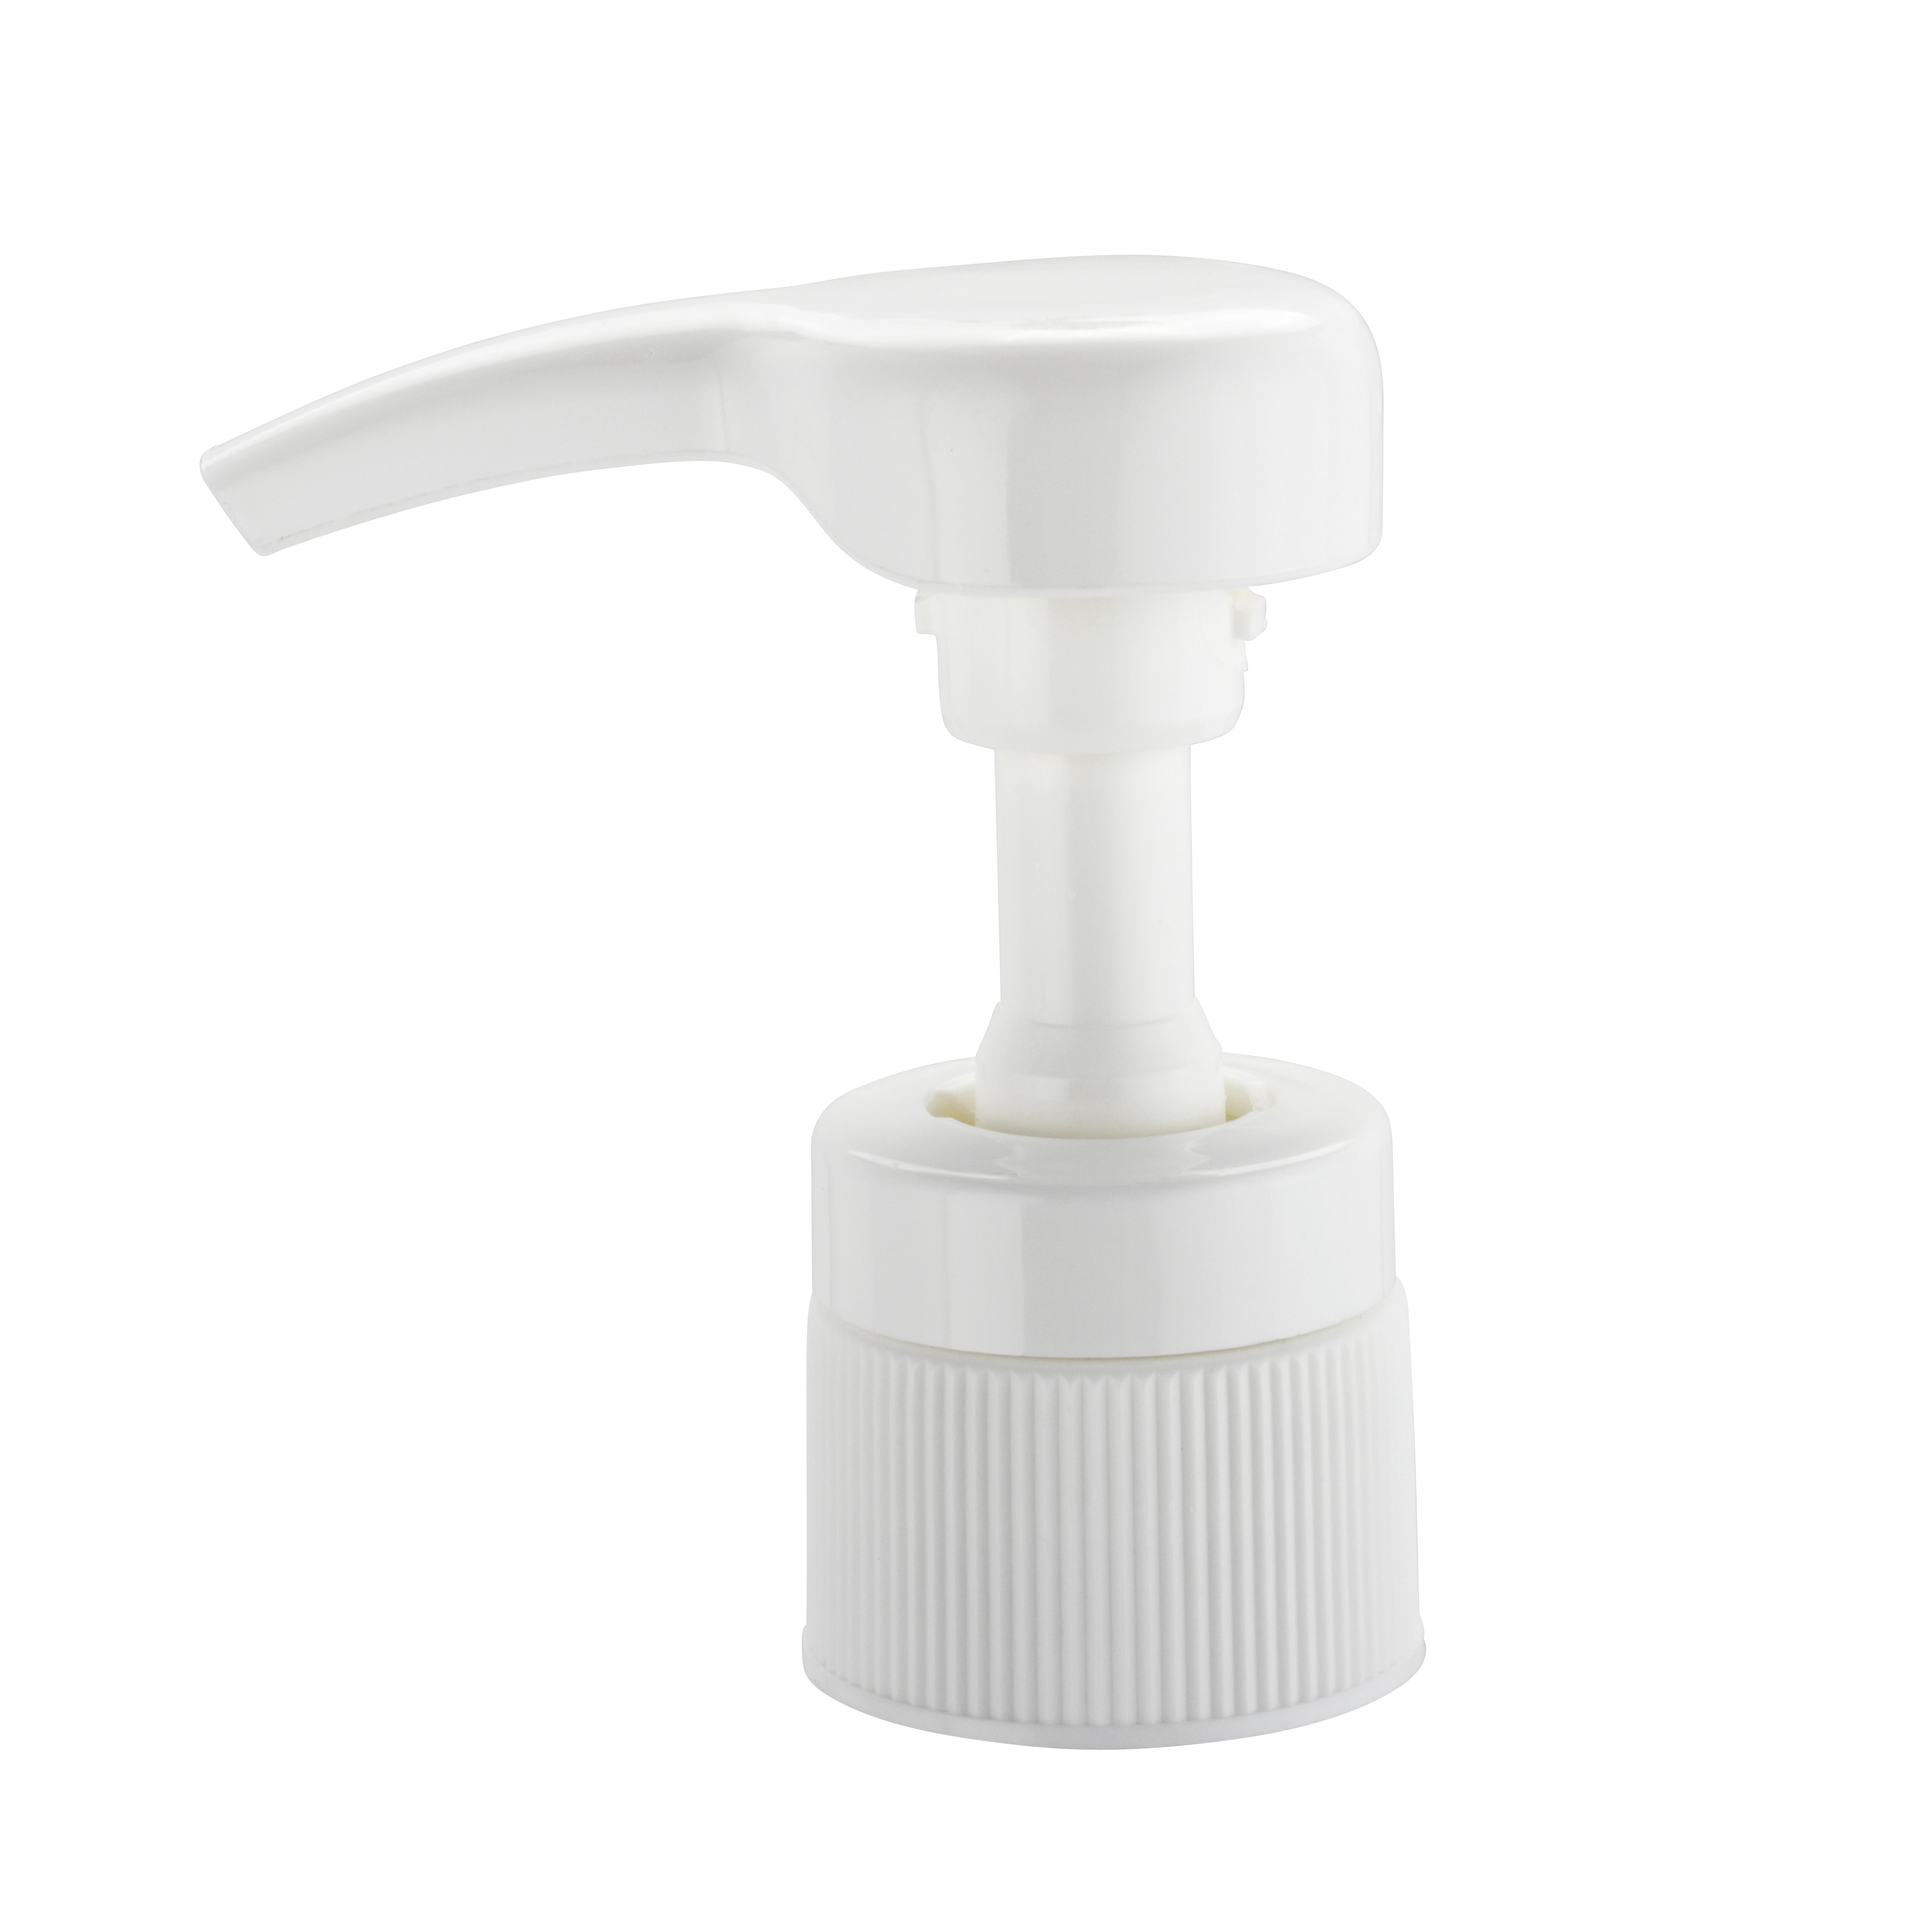 White lid with push dispenser